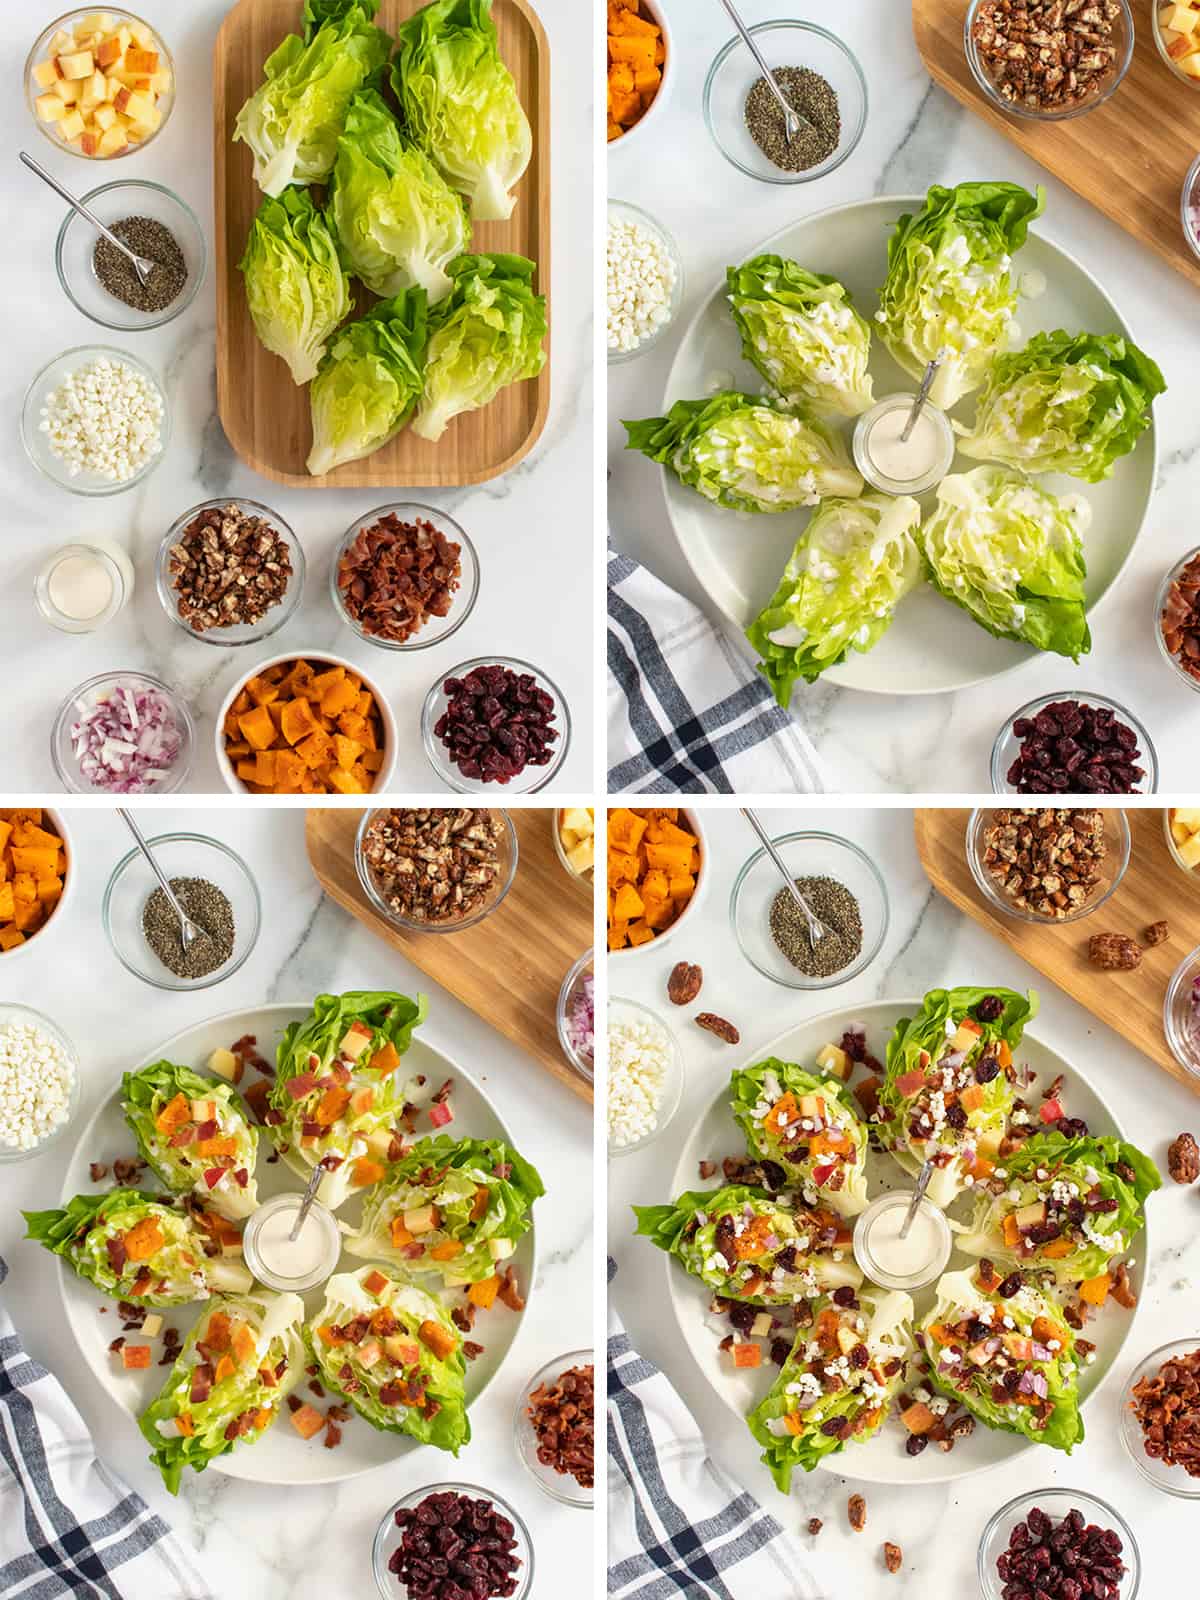 How to Make Mini Fall Wedge Salads by The BakerMama